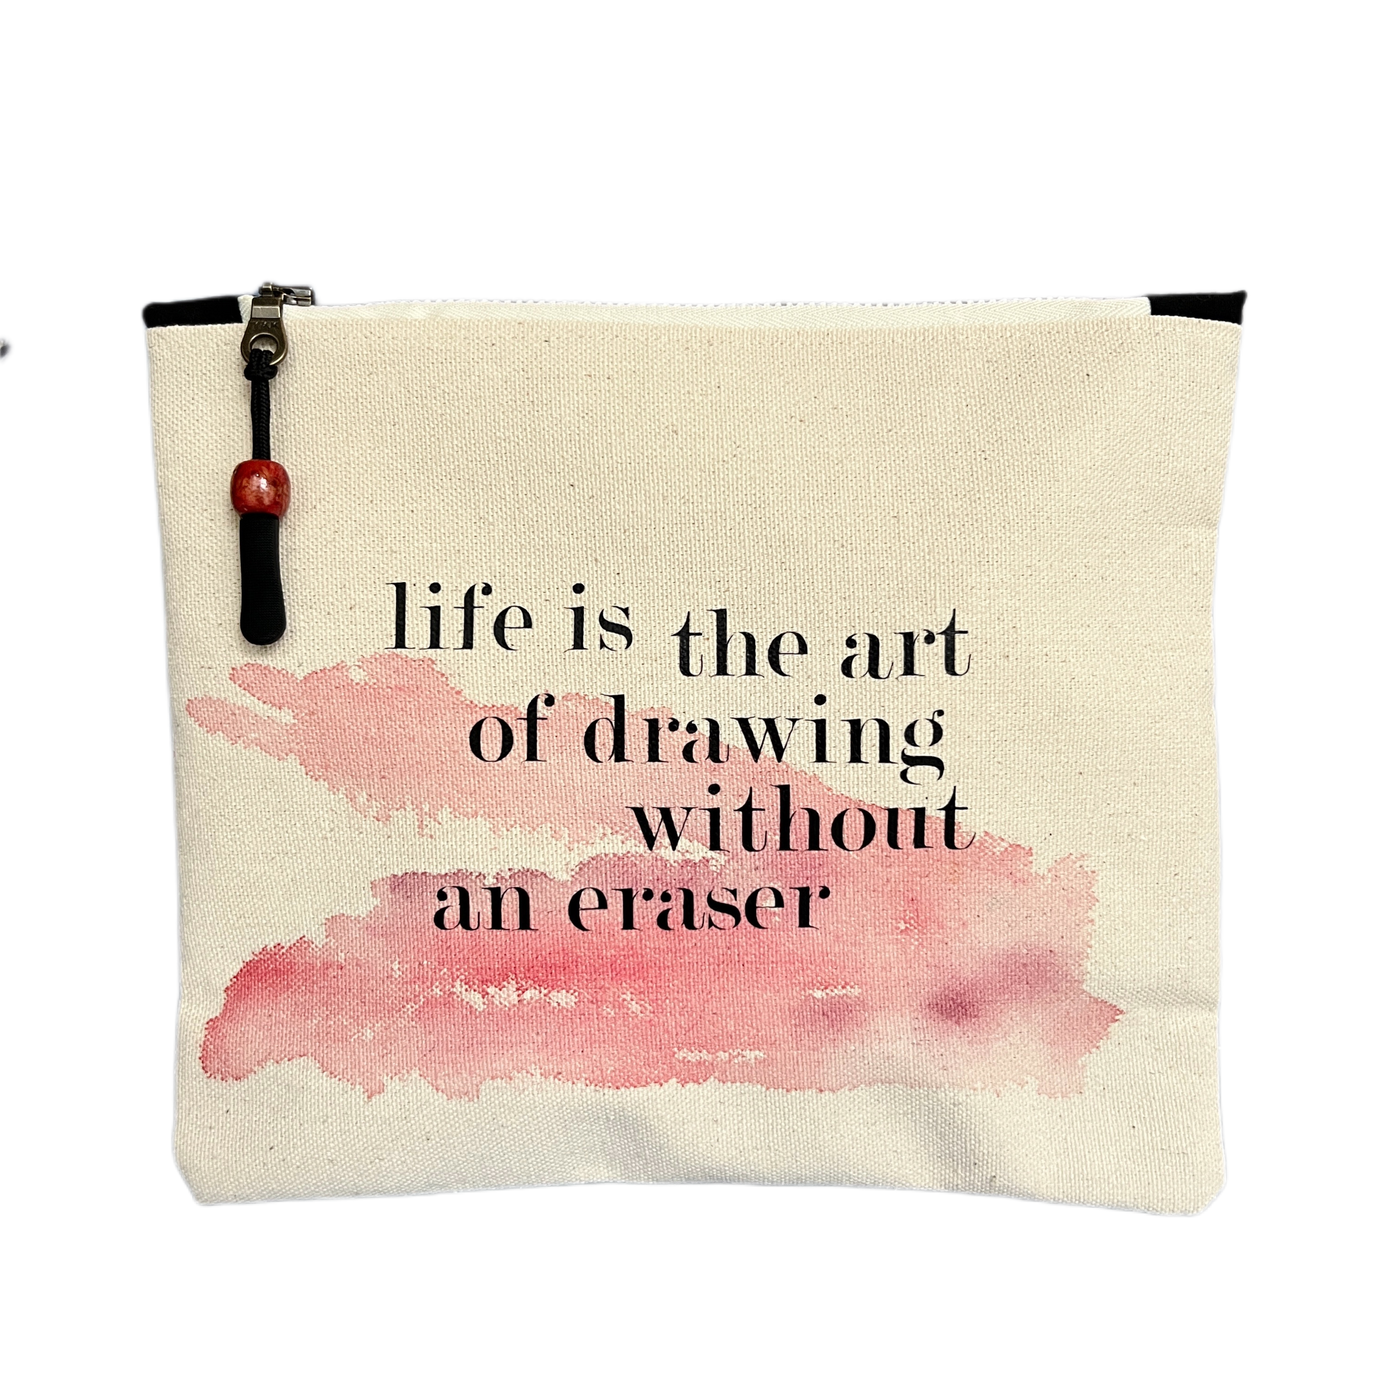 mini canvas zip bag  - life is the art of drawing without an eraser